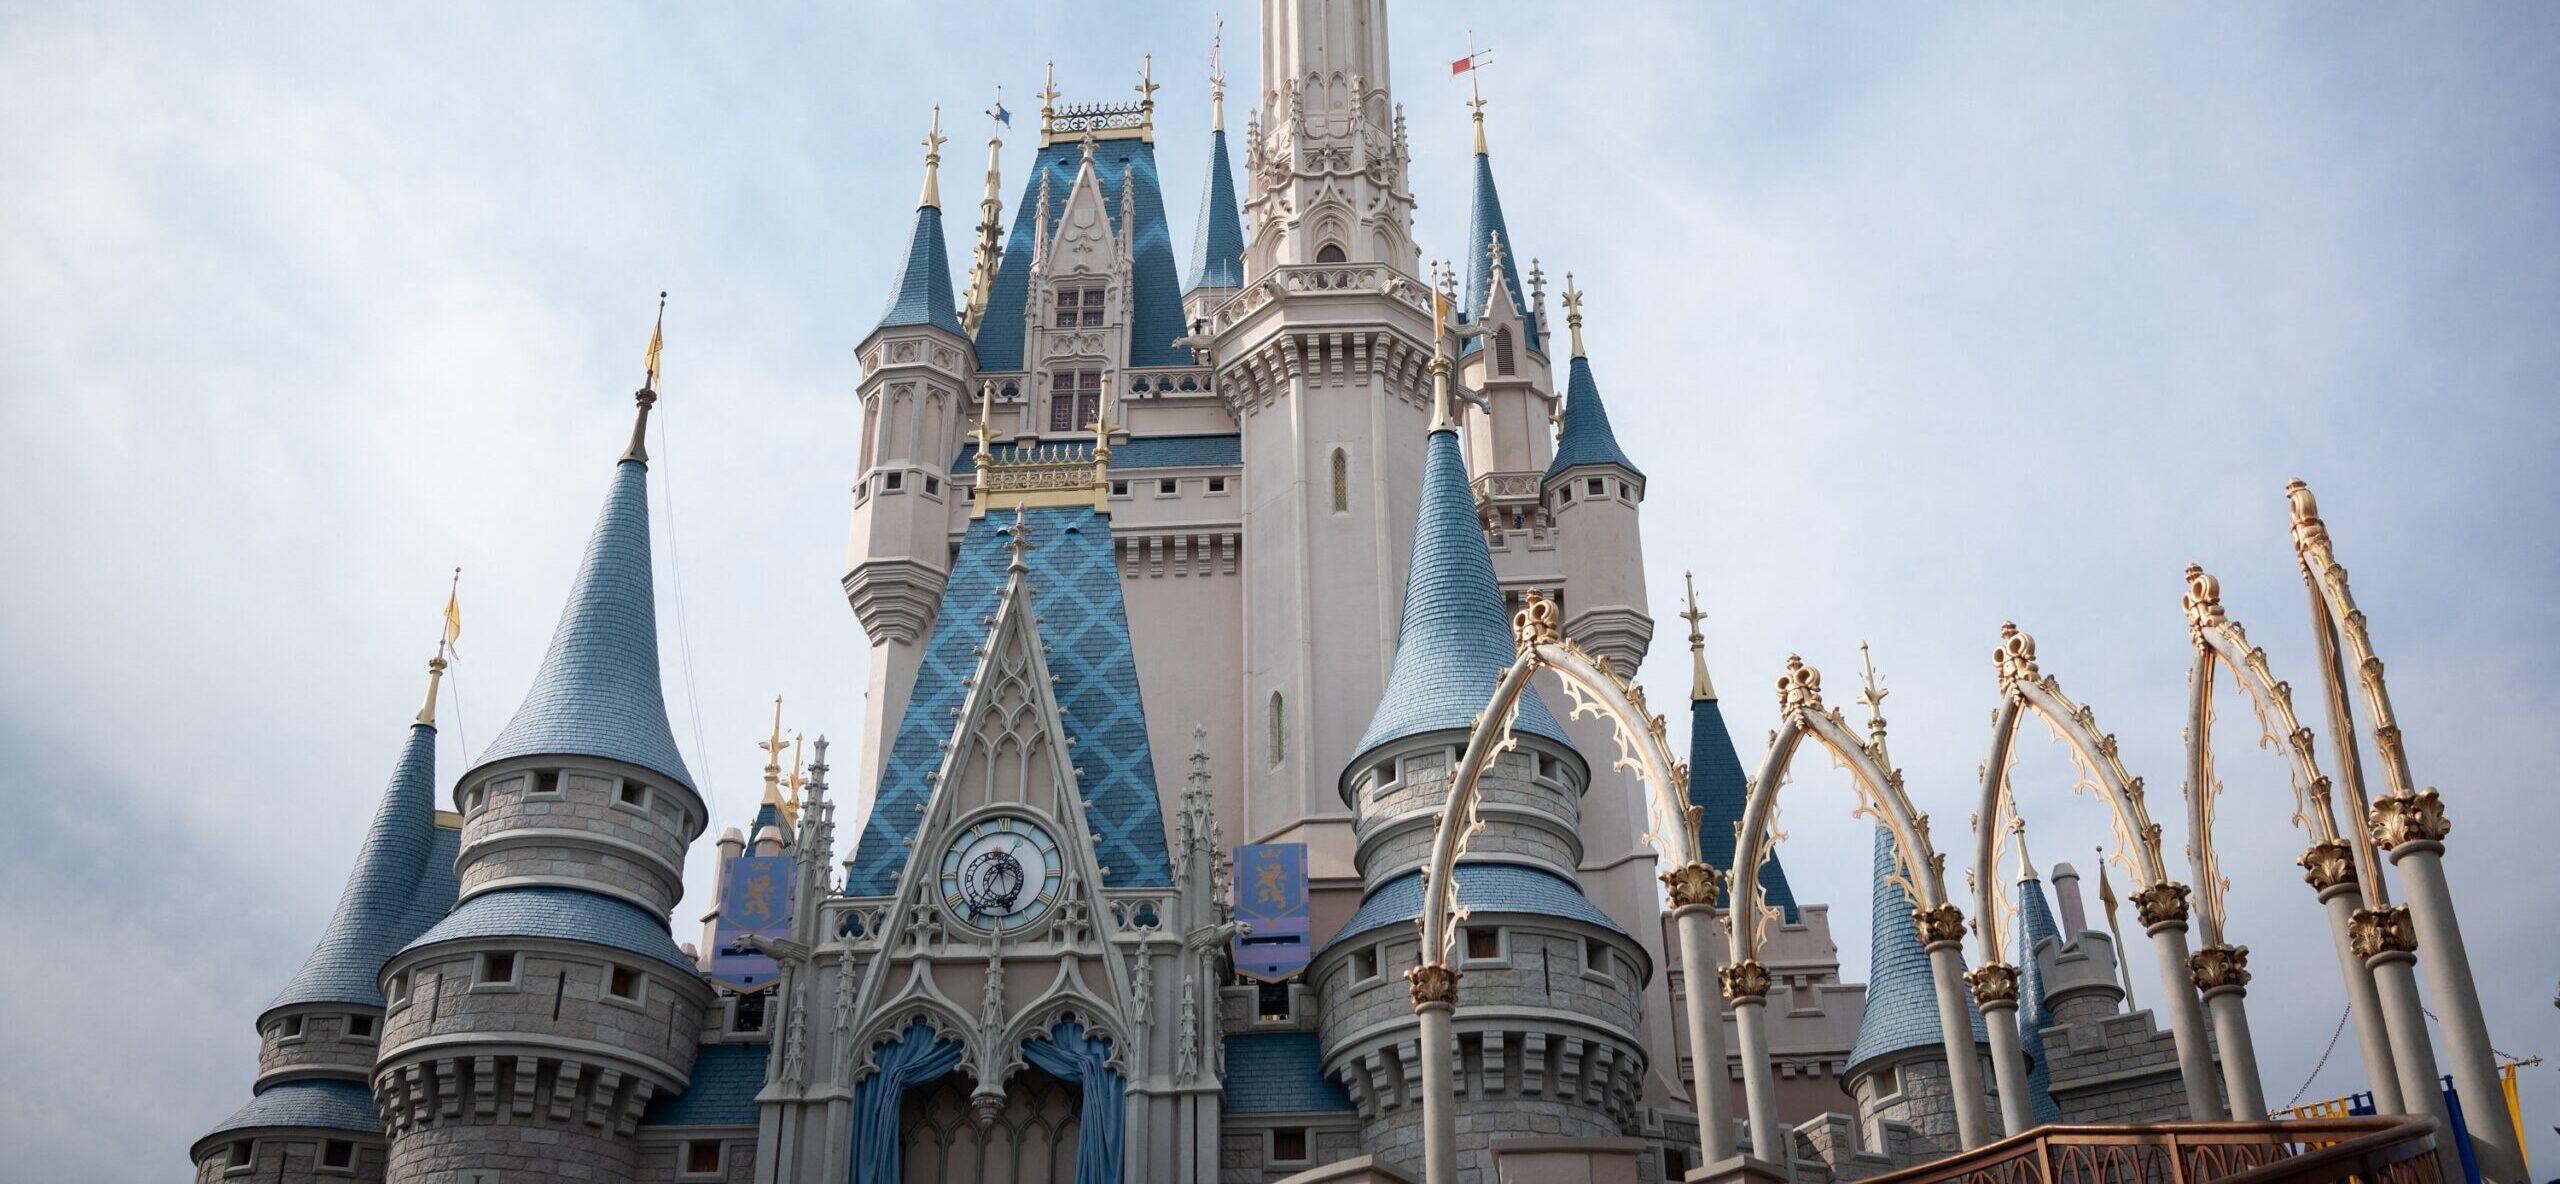 Raging Disney Guest Assaults Security Guard: 'Do You Want To See My Bra?'